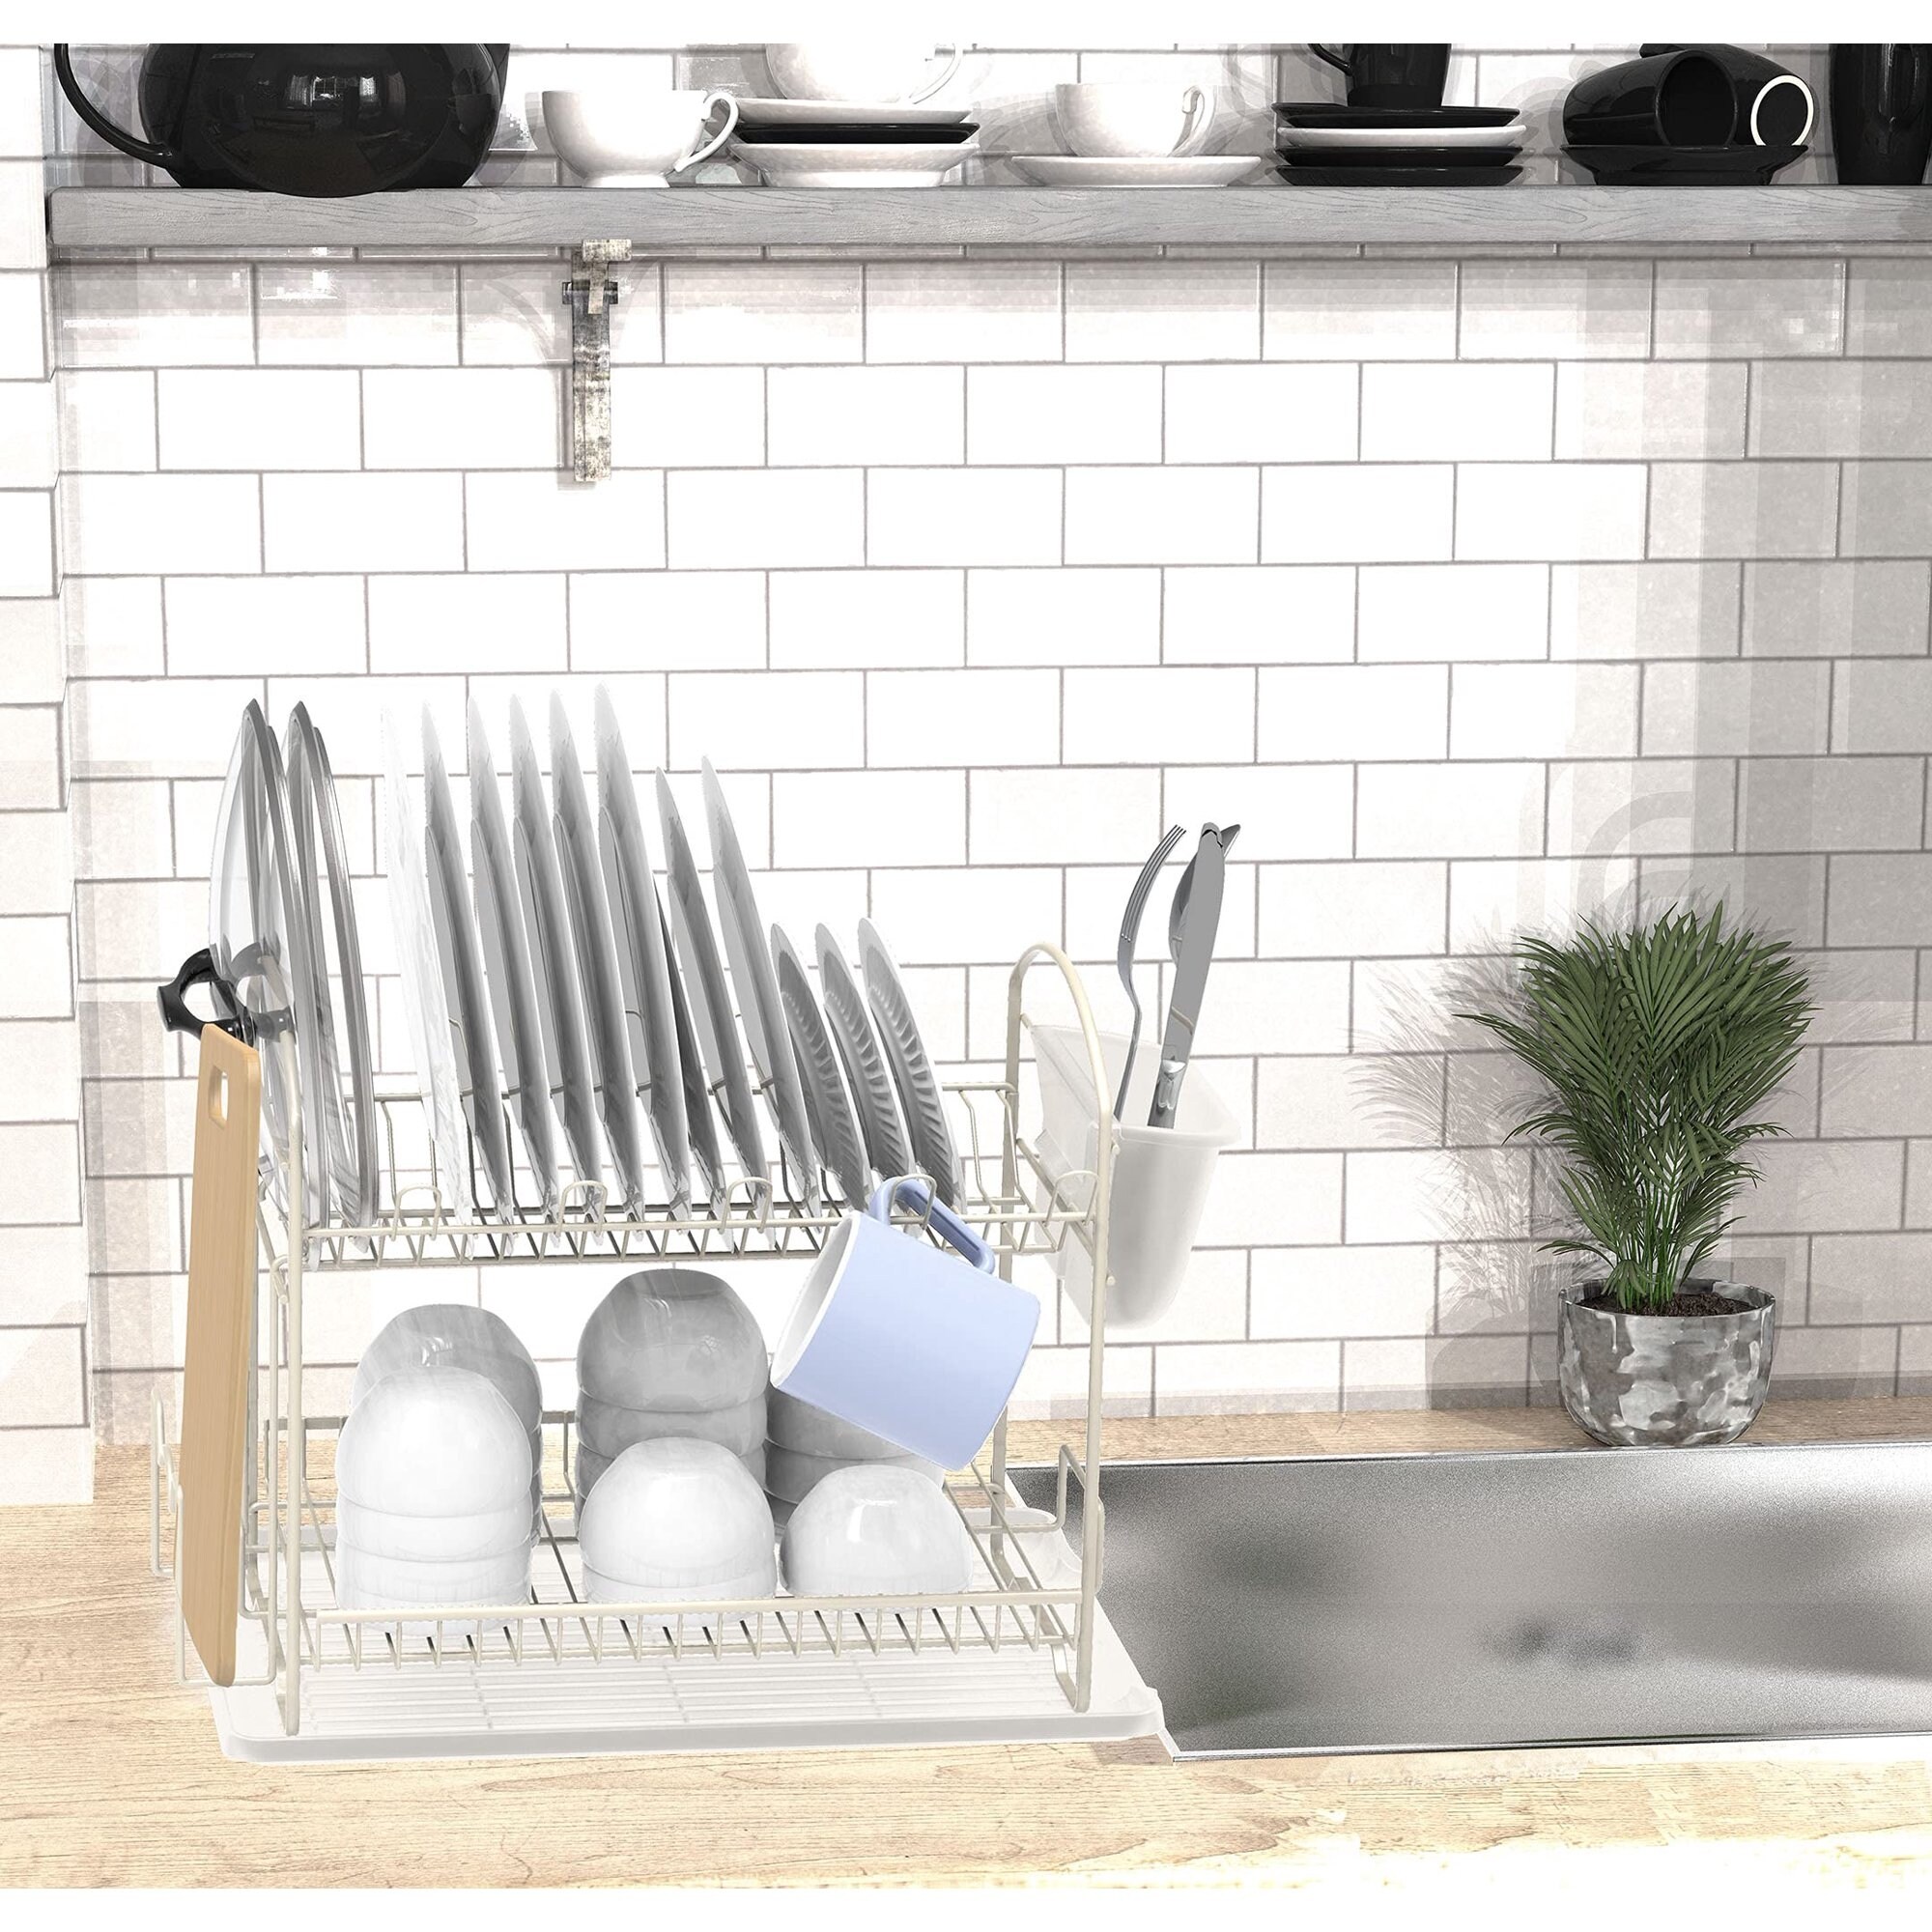 2 Tier Dish Rack with Drainer Board - Bed Bath & Beyond - 37482094